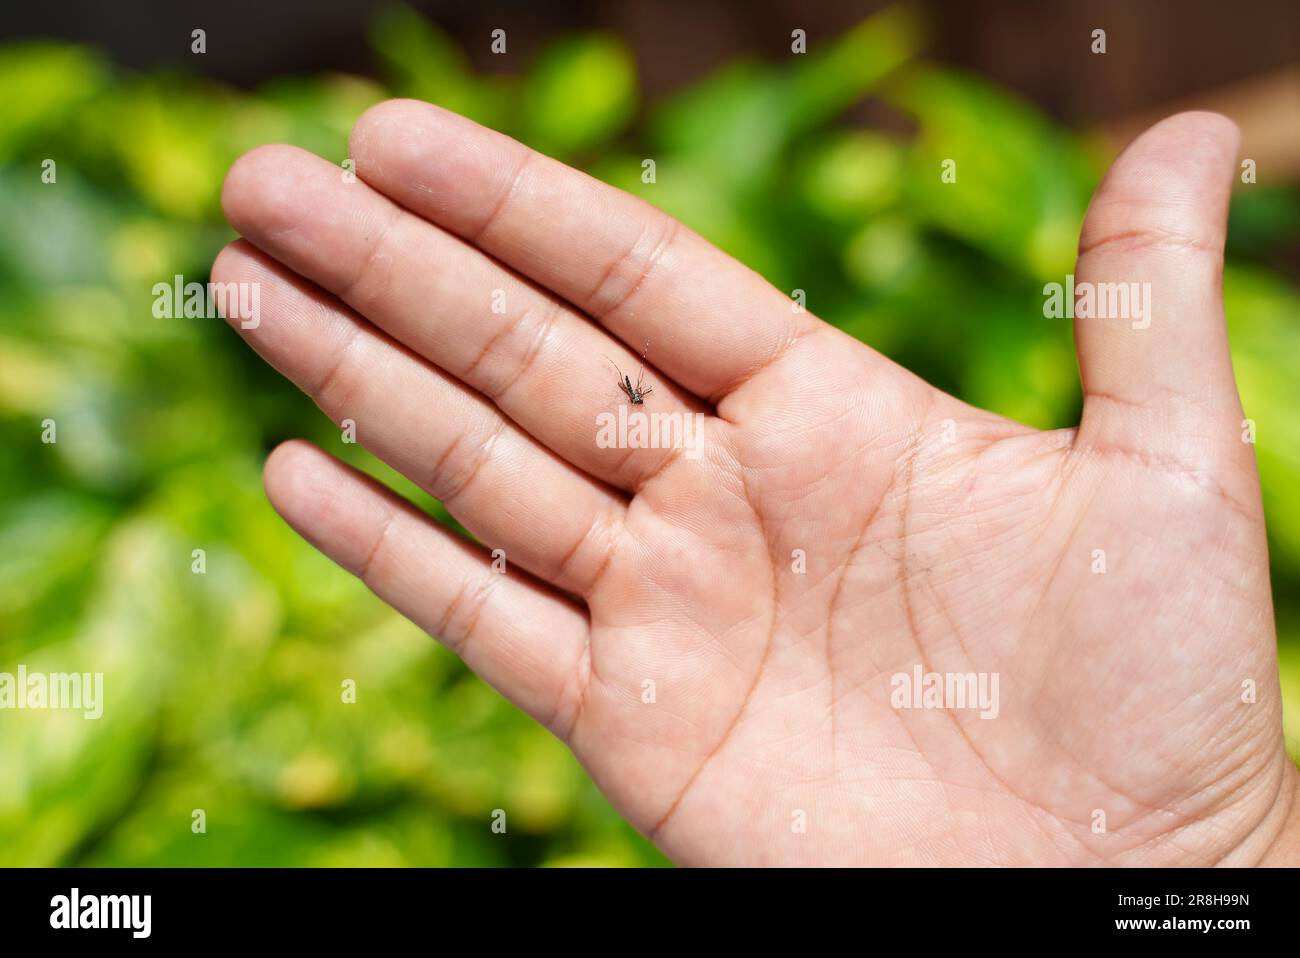 Close-Up Shot of Unidentified Person's Hand Holding Crushed Dengue Mosquito Stock Photo